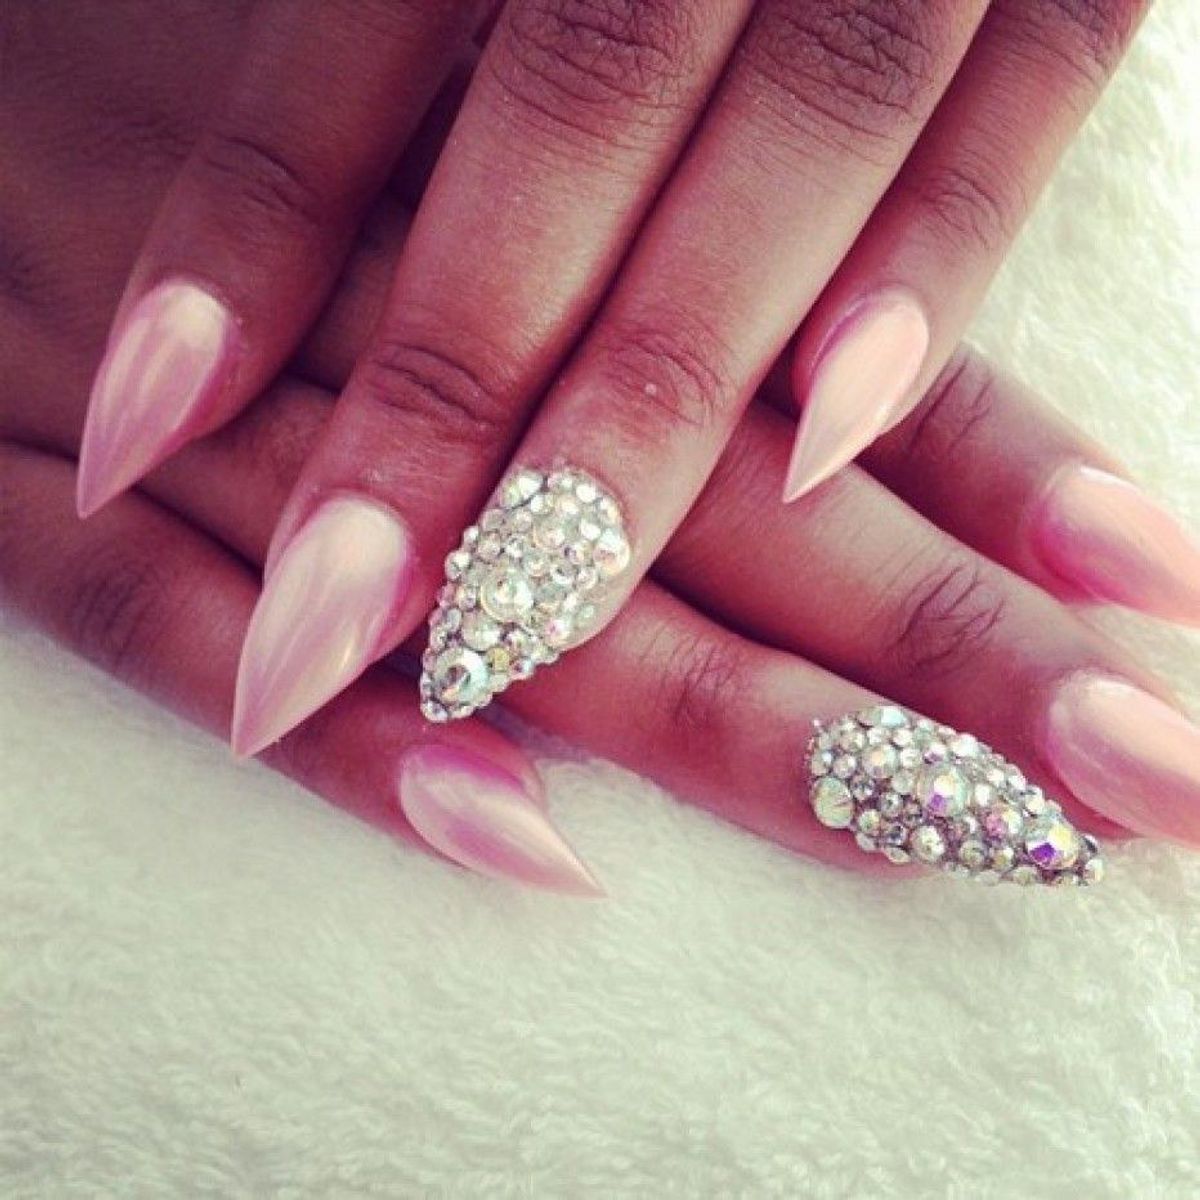 10 Things No One Tells You About Having Acrylic Nails